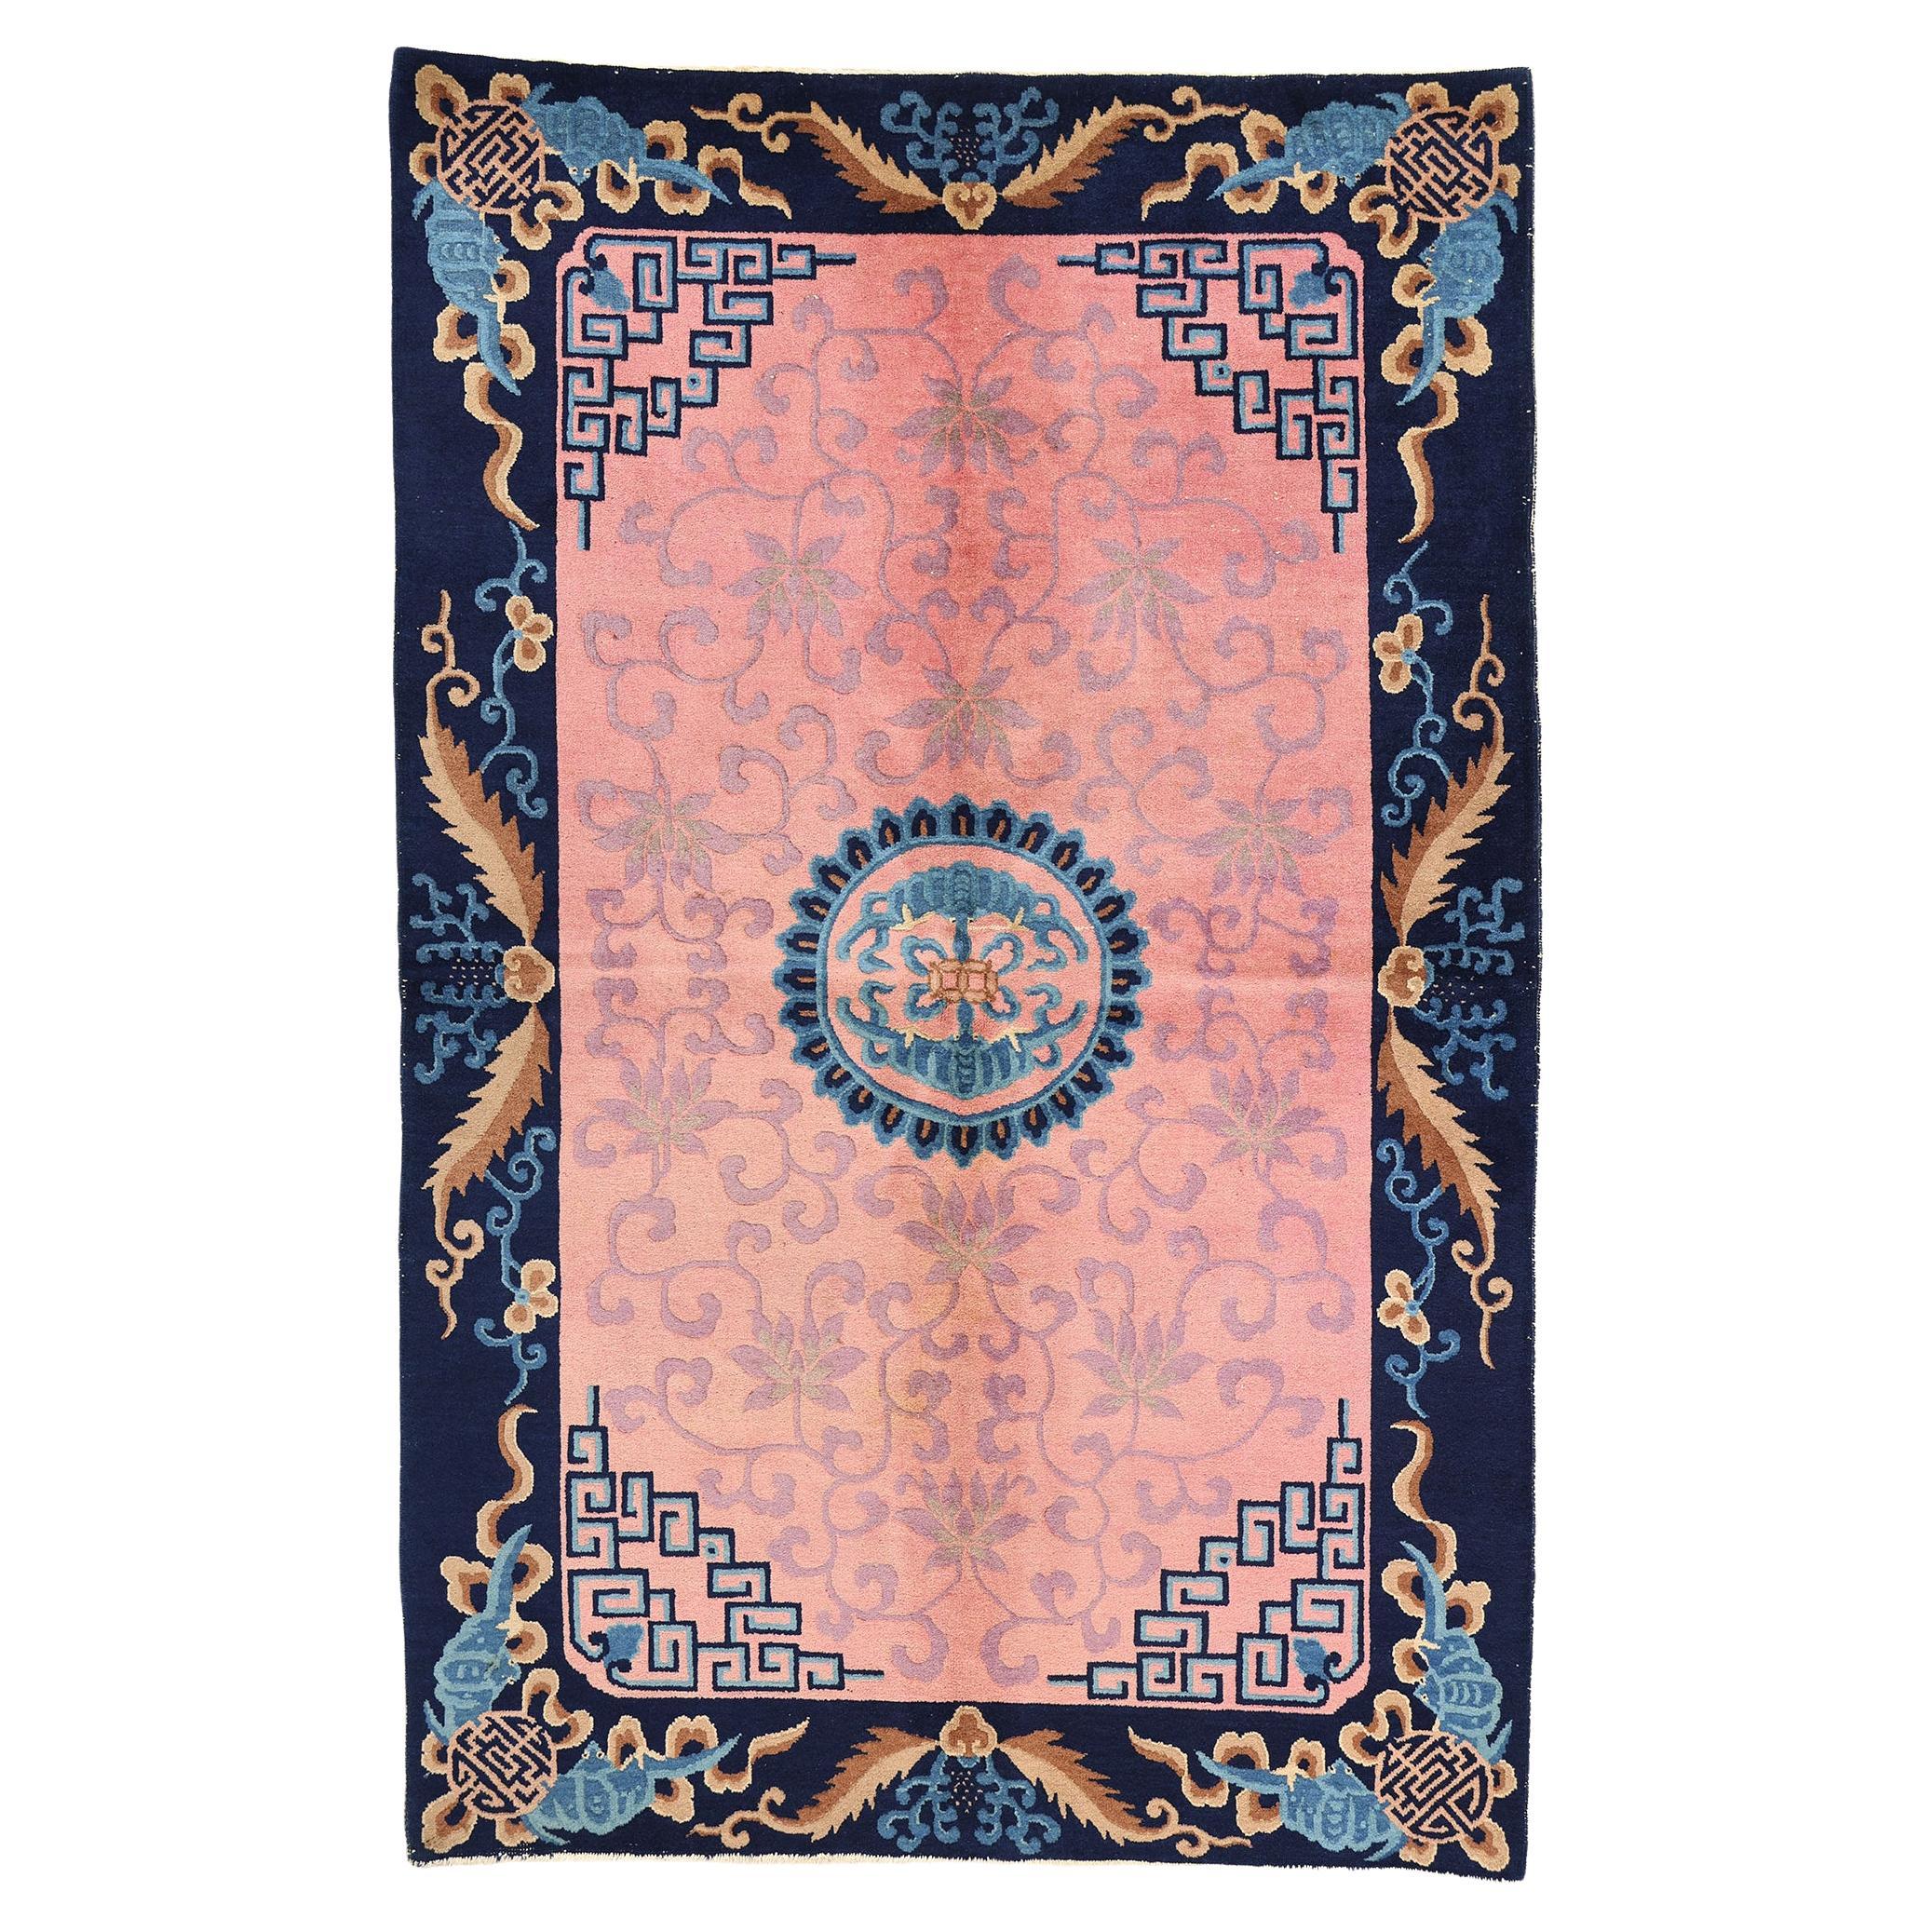 Antique Pink Chinese Art Deco Rug with Jazz Age Splendor For Sale